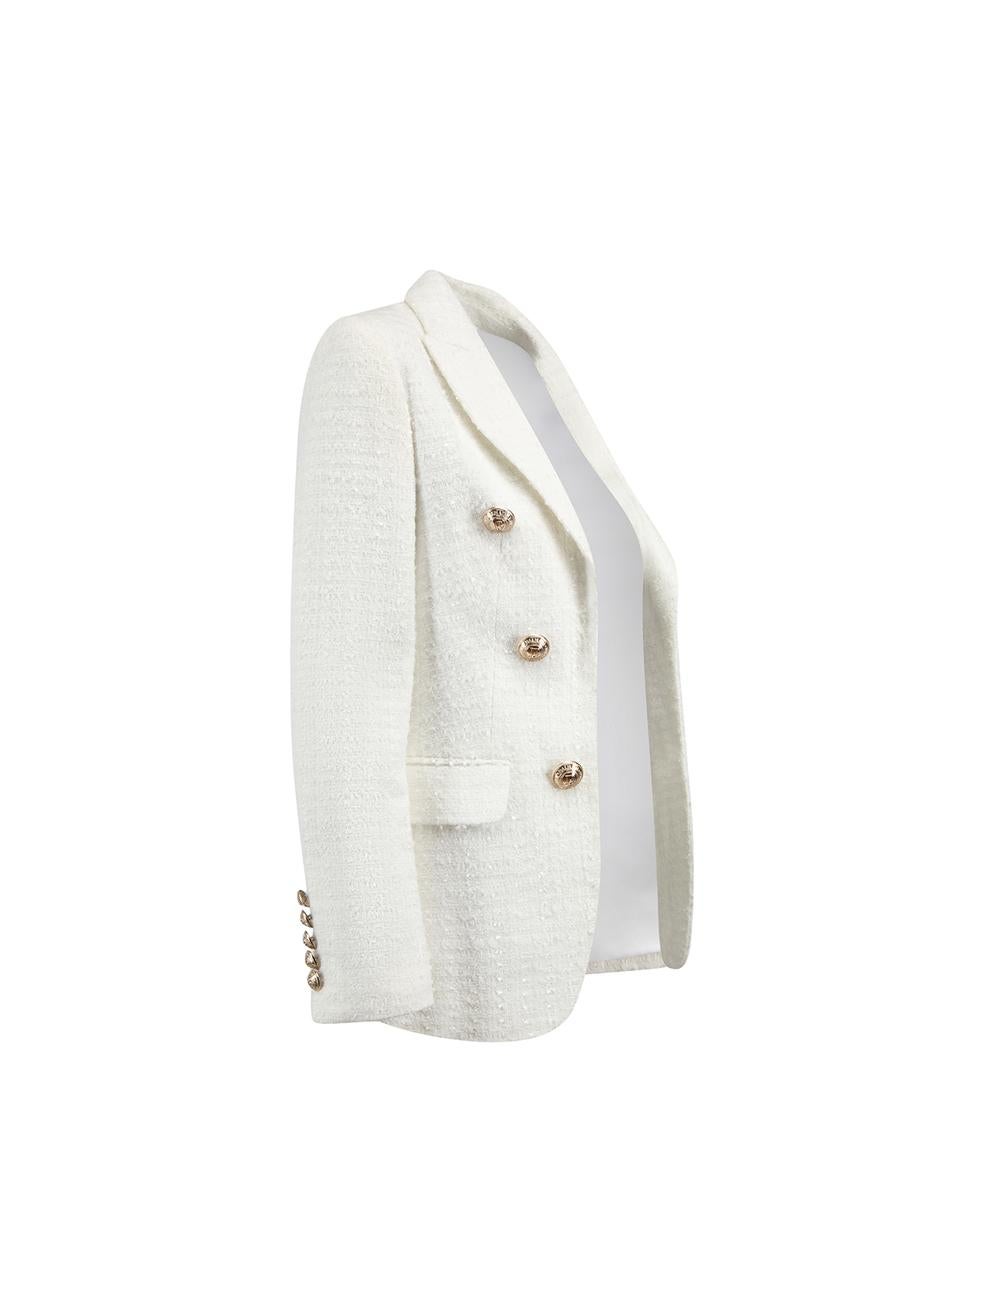 CONDITION is Never worn. No visible wear to jacket is evident on this used Balmain designer resale item. Original coat bag is included.



Details


Ivory

Tweed

Slim fit blazer

Open front

Buttons accent

Buttoned cuffs

Front side pockets with